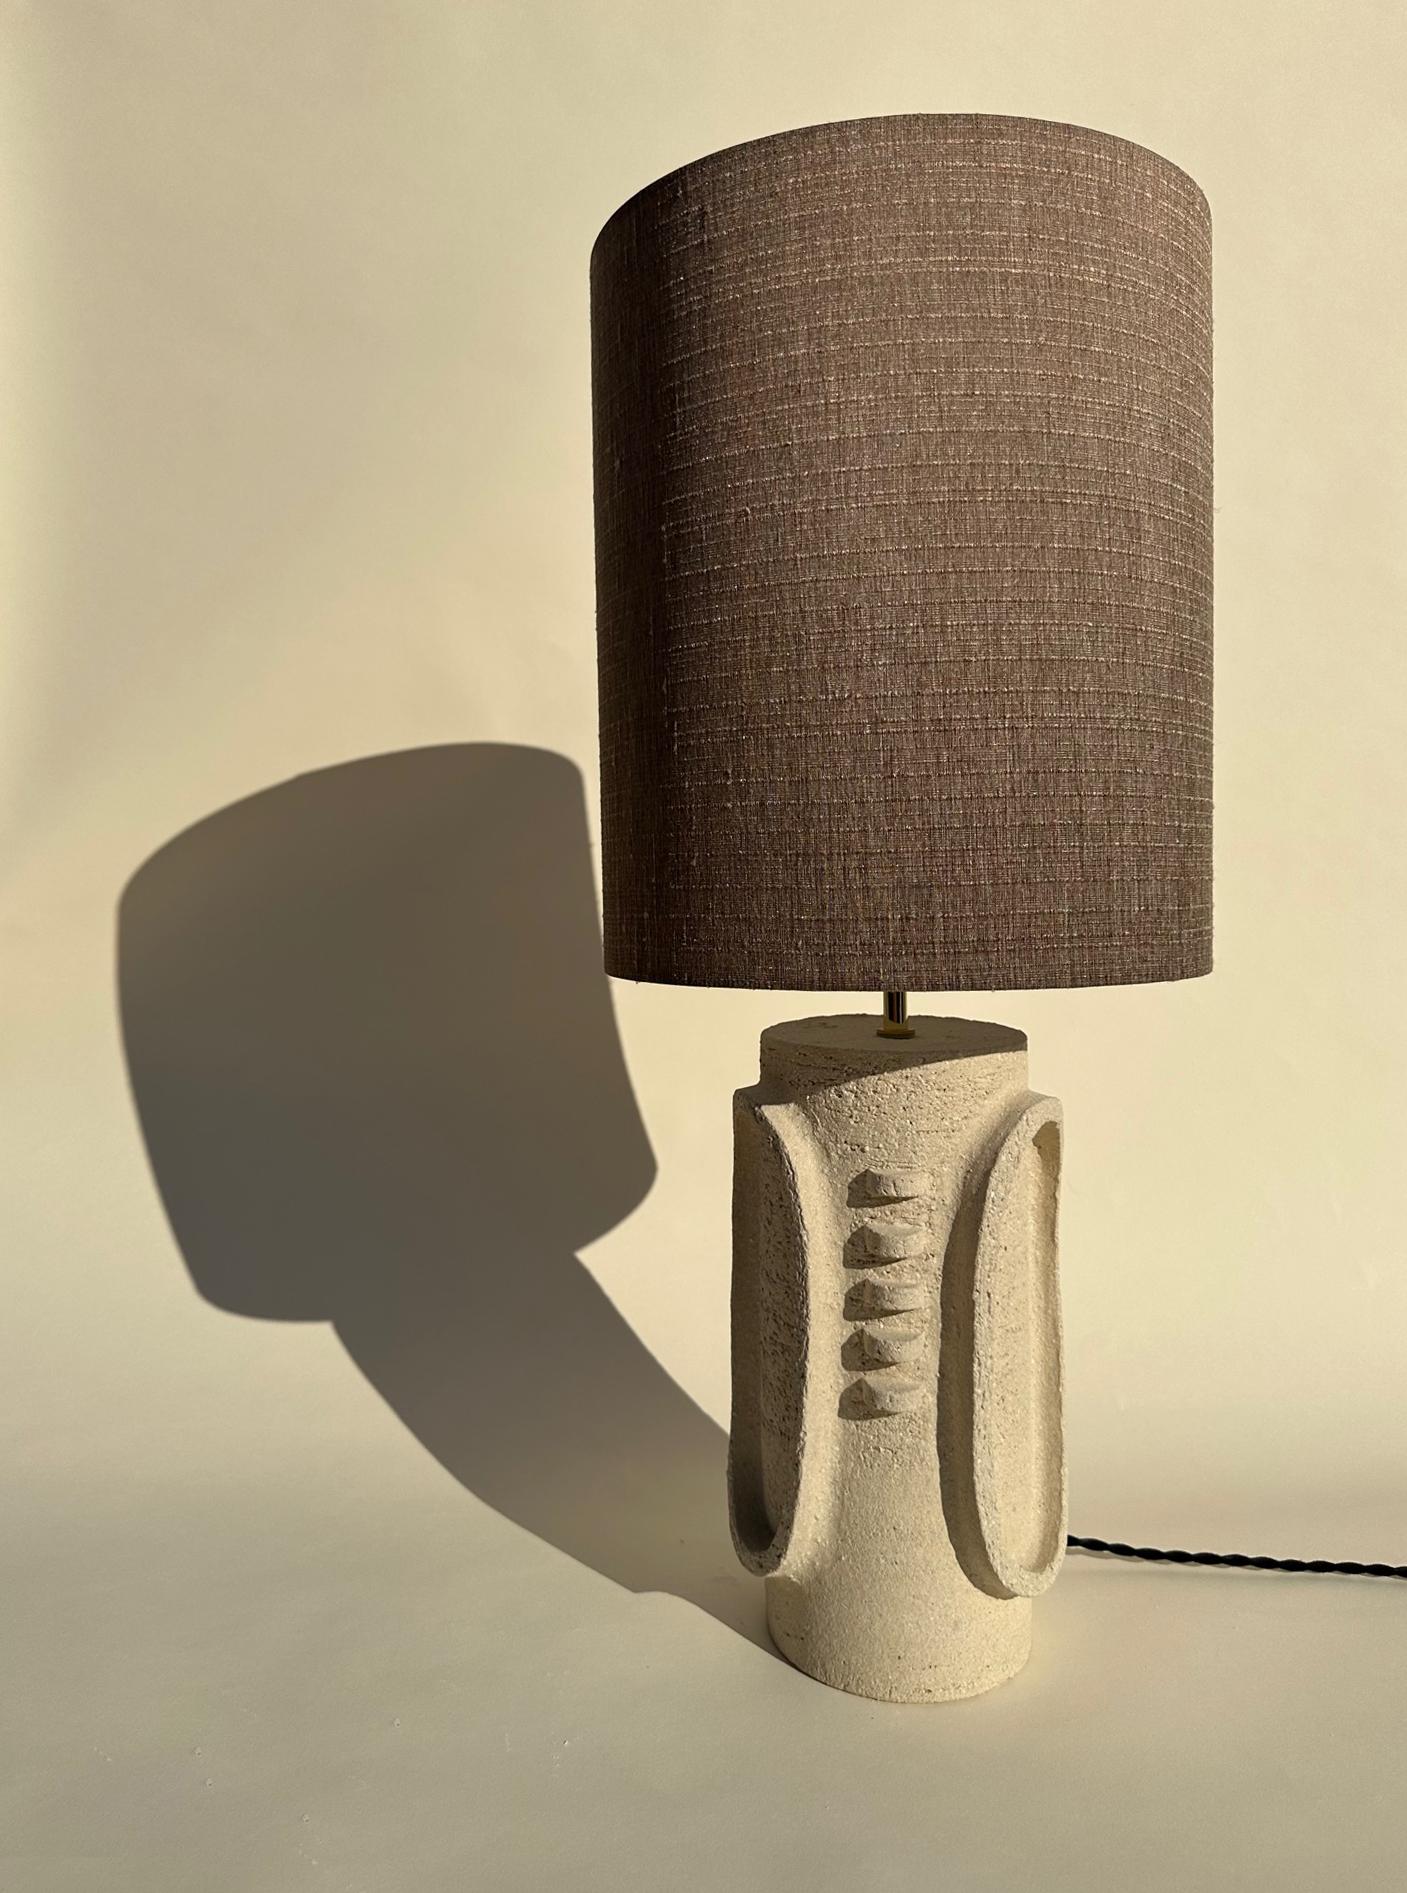 Small Graphic Table Lamp by Olivia Cognet
Dimensions: Base: D 20 x H 30 cm, Shade : 40 x 40 cm, Total Height: 70 cm. 
Materials: Ceramic.


Since moving to Los Angeles in 2016, French artist and designer Olivia Cognet has focused on ceramics as the